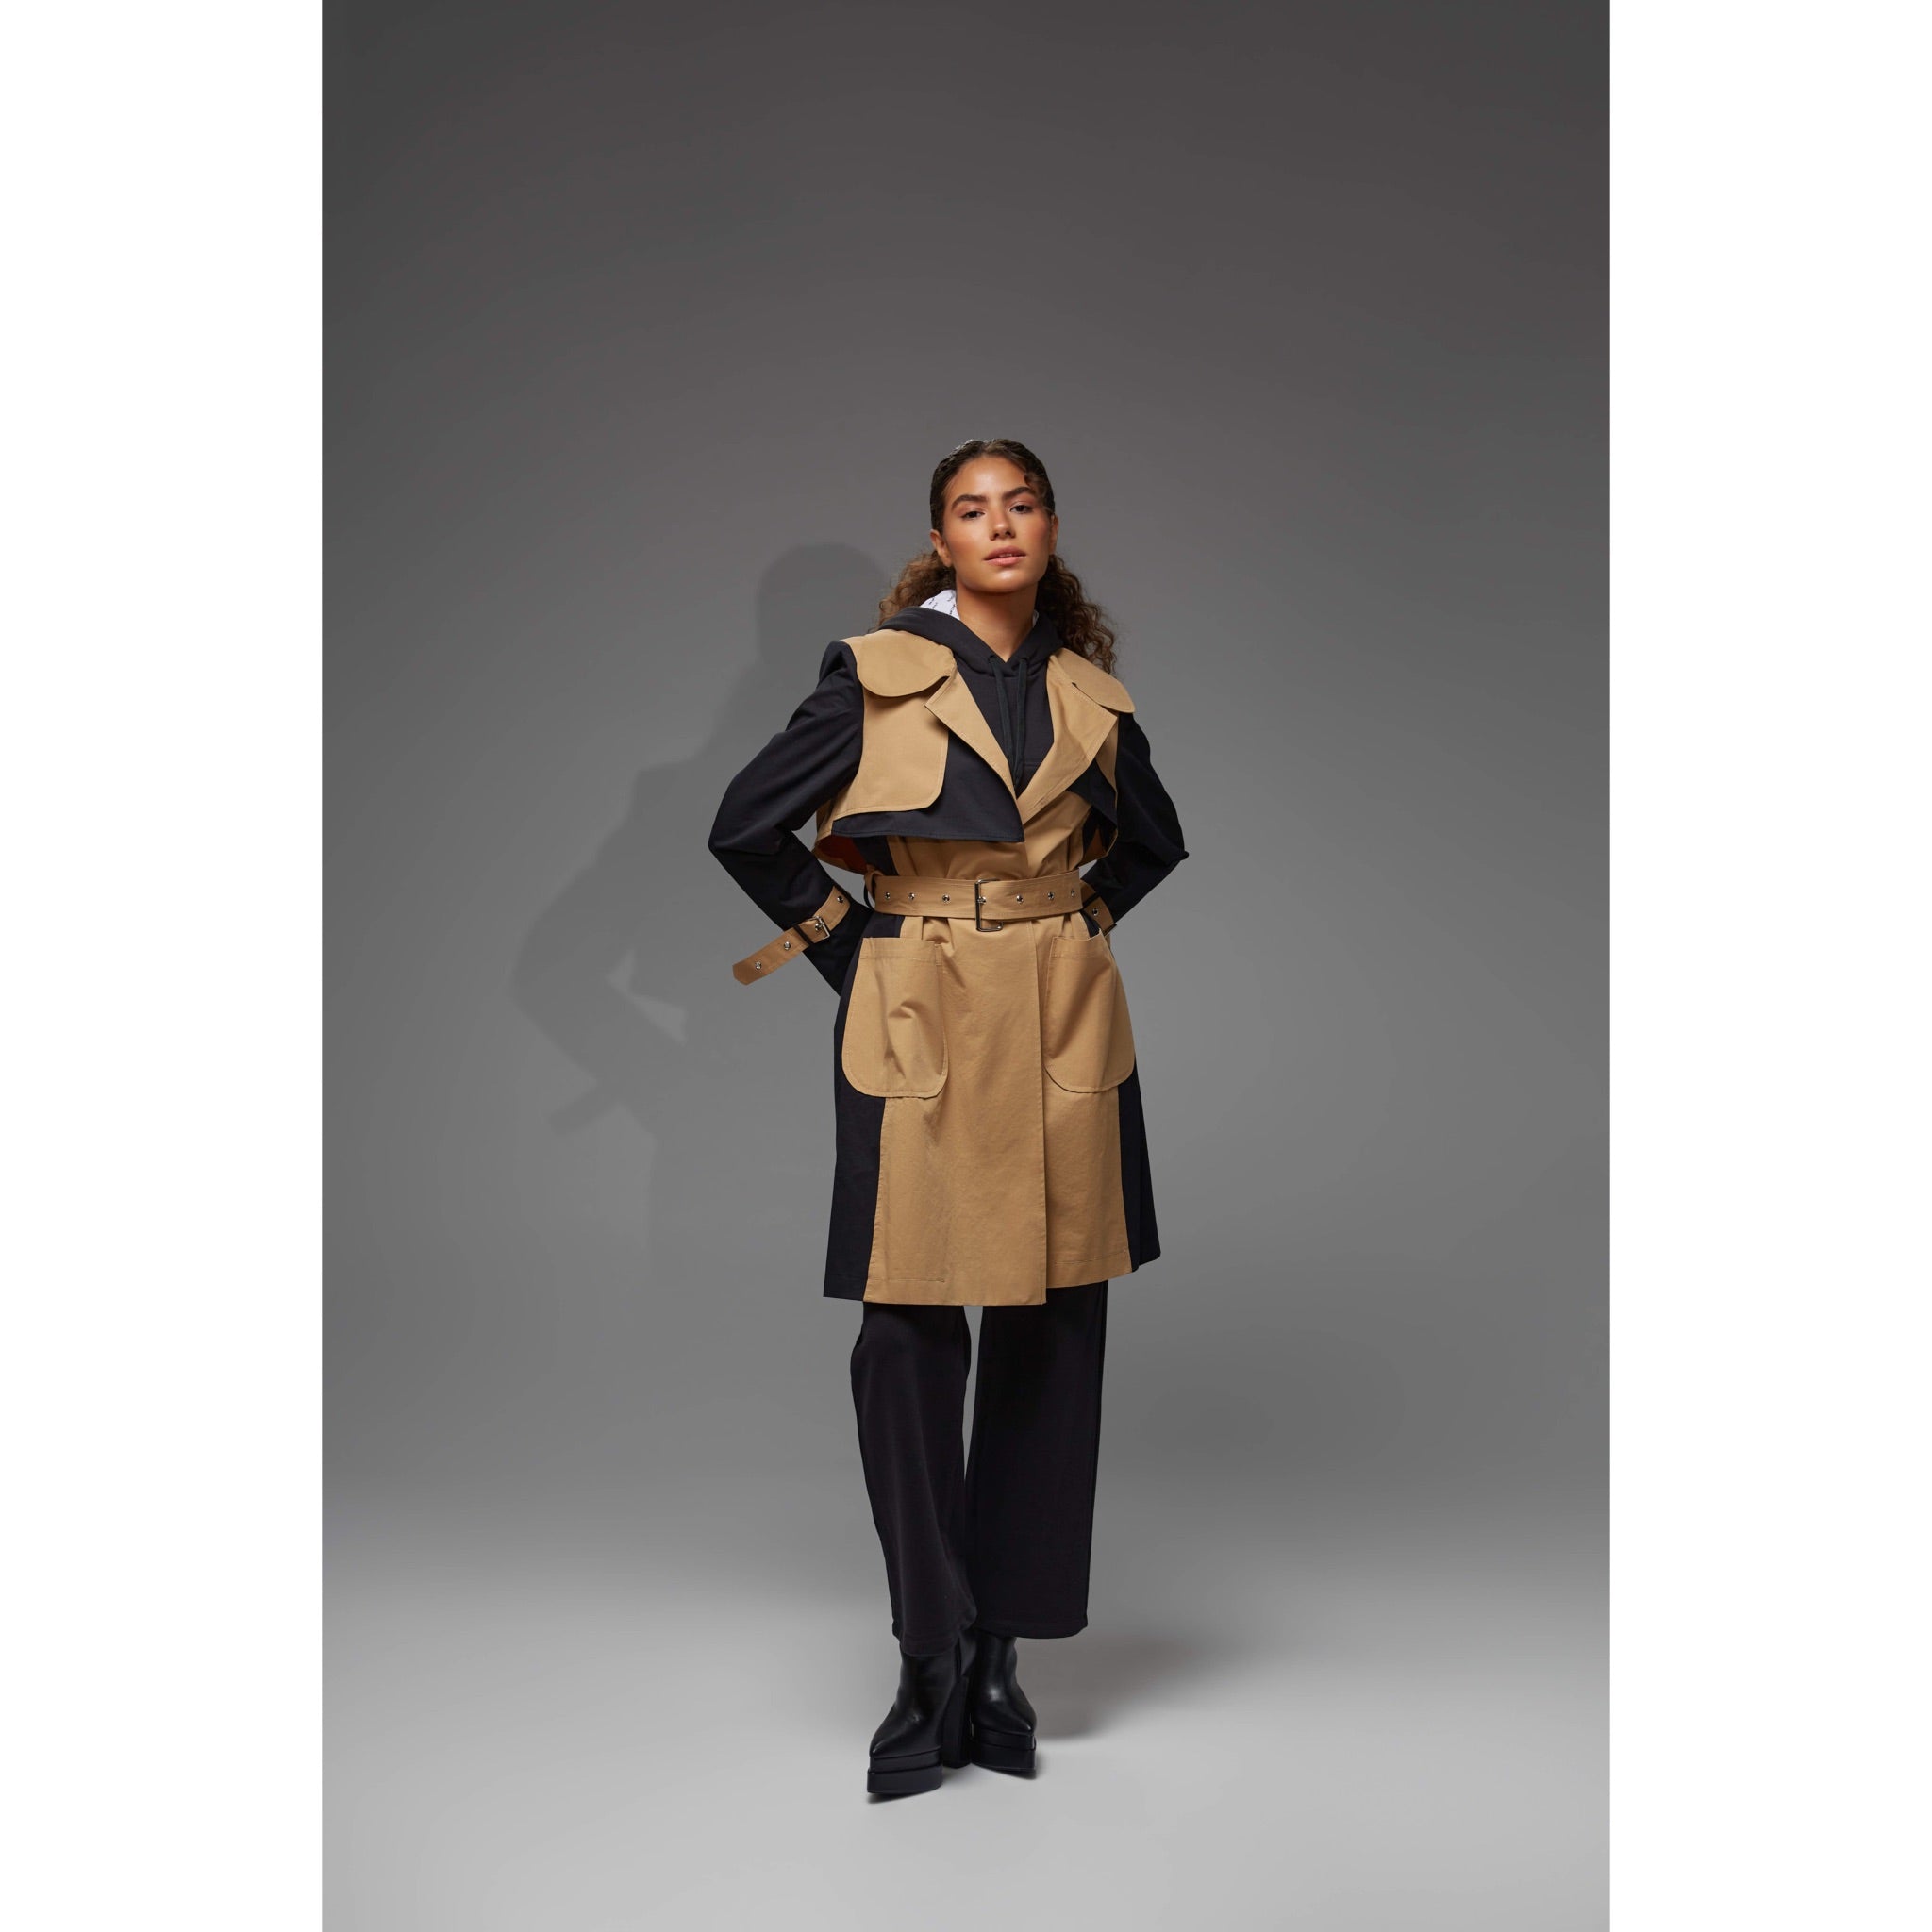 Dual Colored Trench Coat in Black & Beige